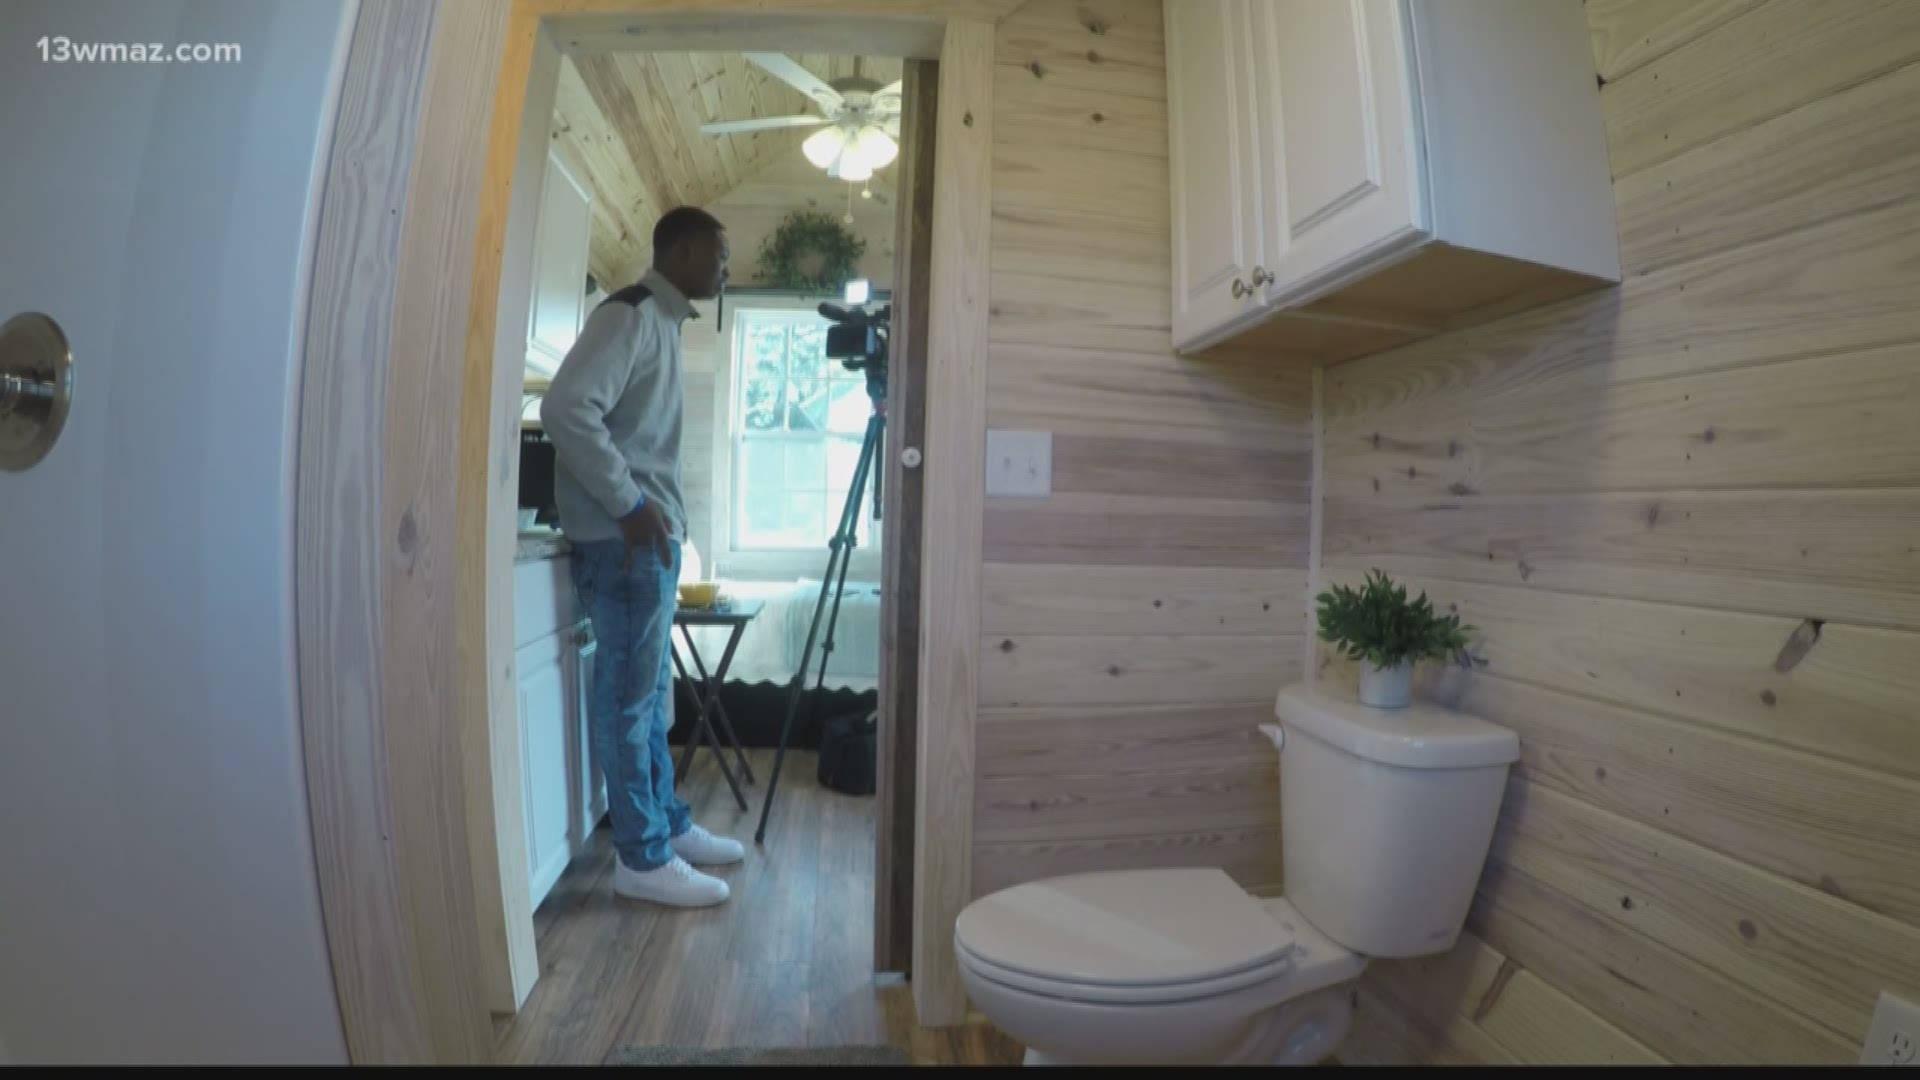 Six months ago, nearly a dozen students began working on building a tiny house to fight homelessness in their community. Now, their first is done.